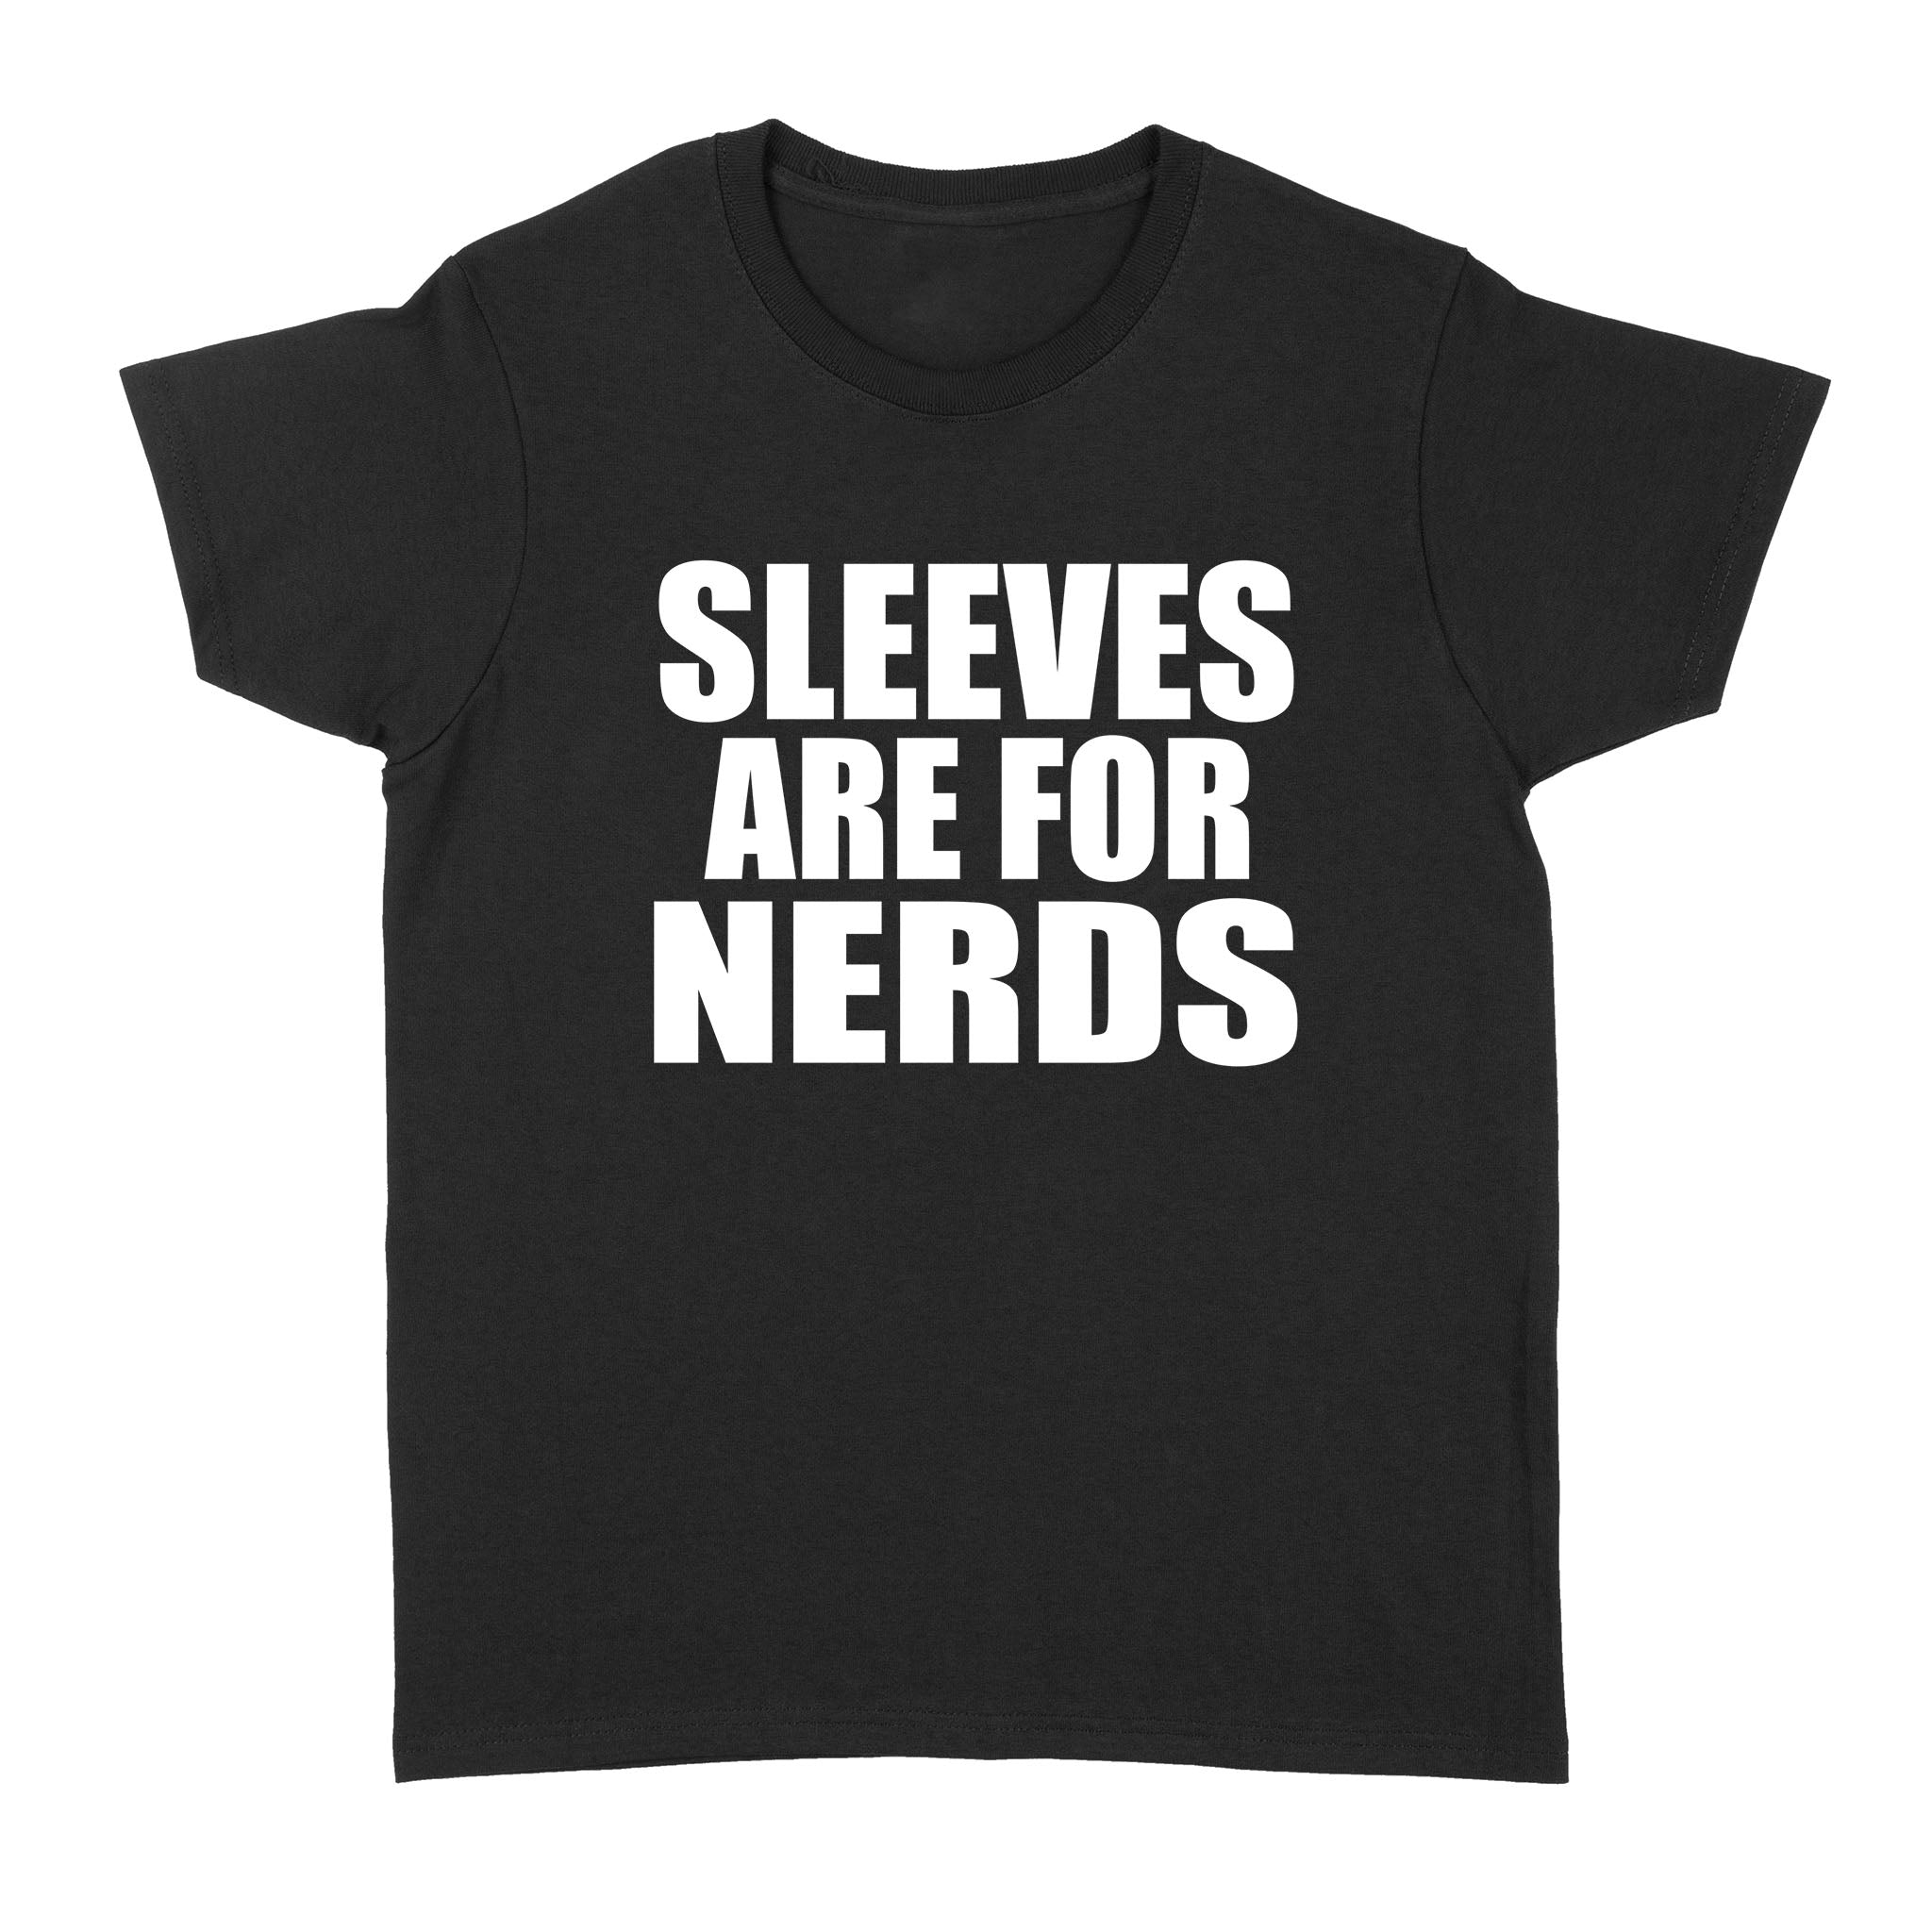 Sleeves are for Nerds - Standard Women's T-shirt